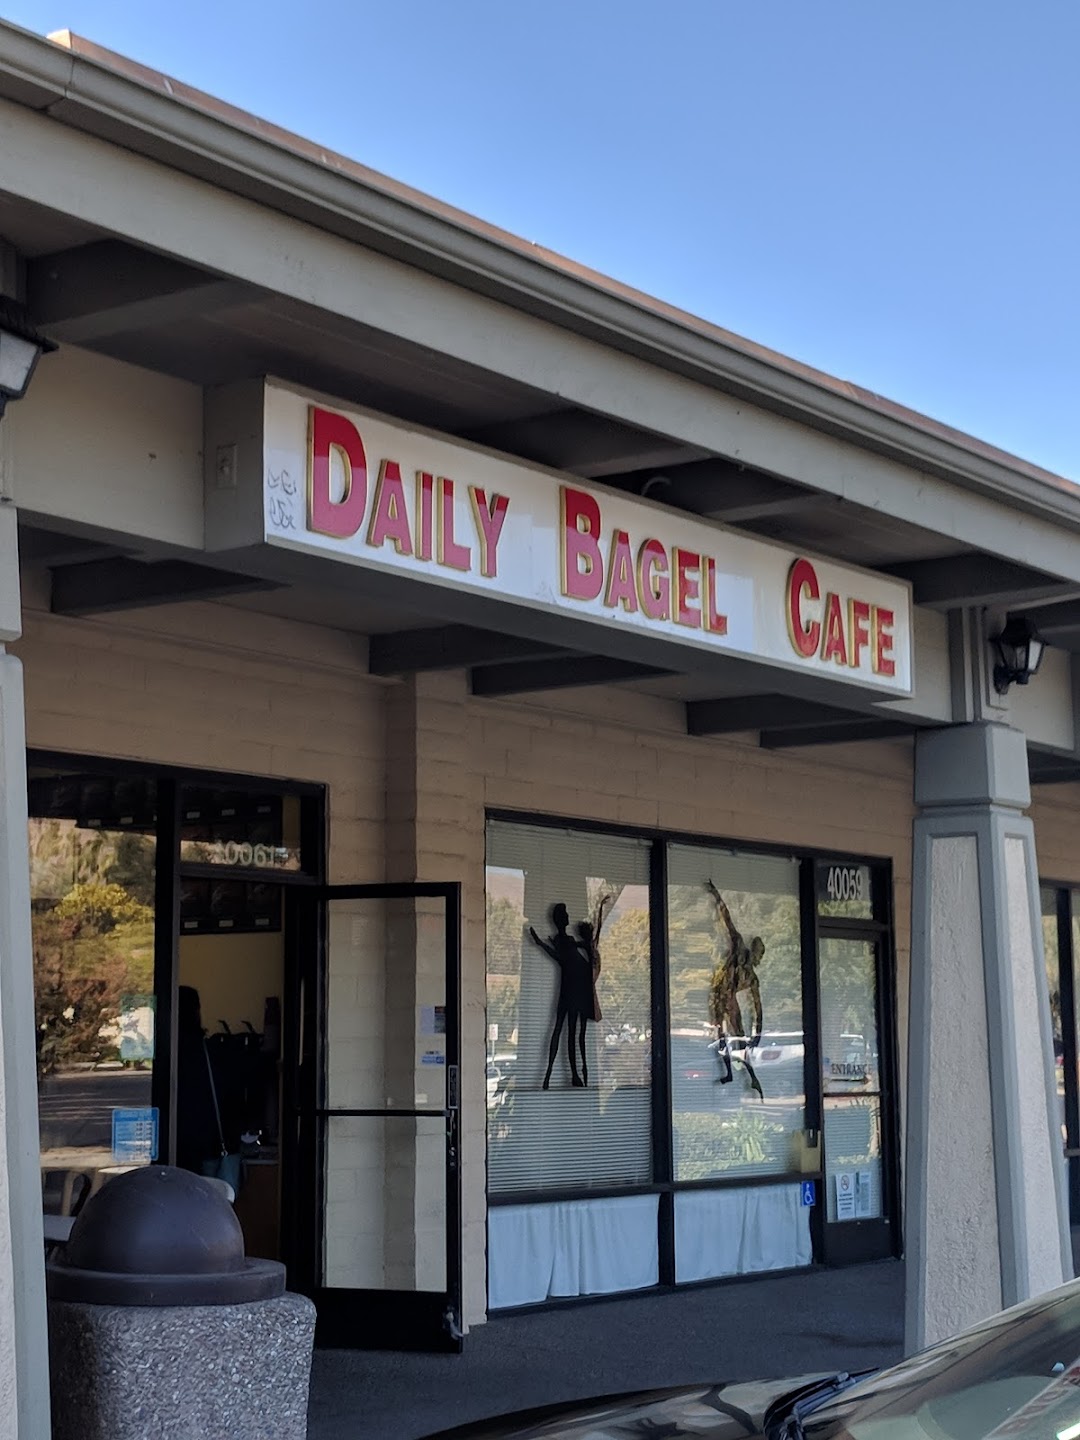 Daily Bagel Cafe